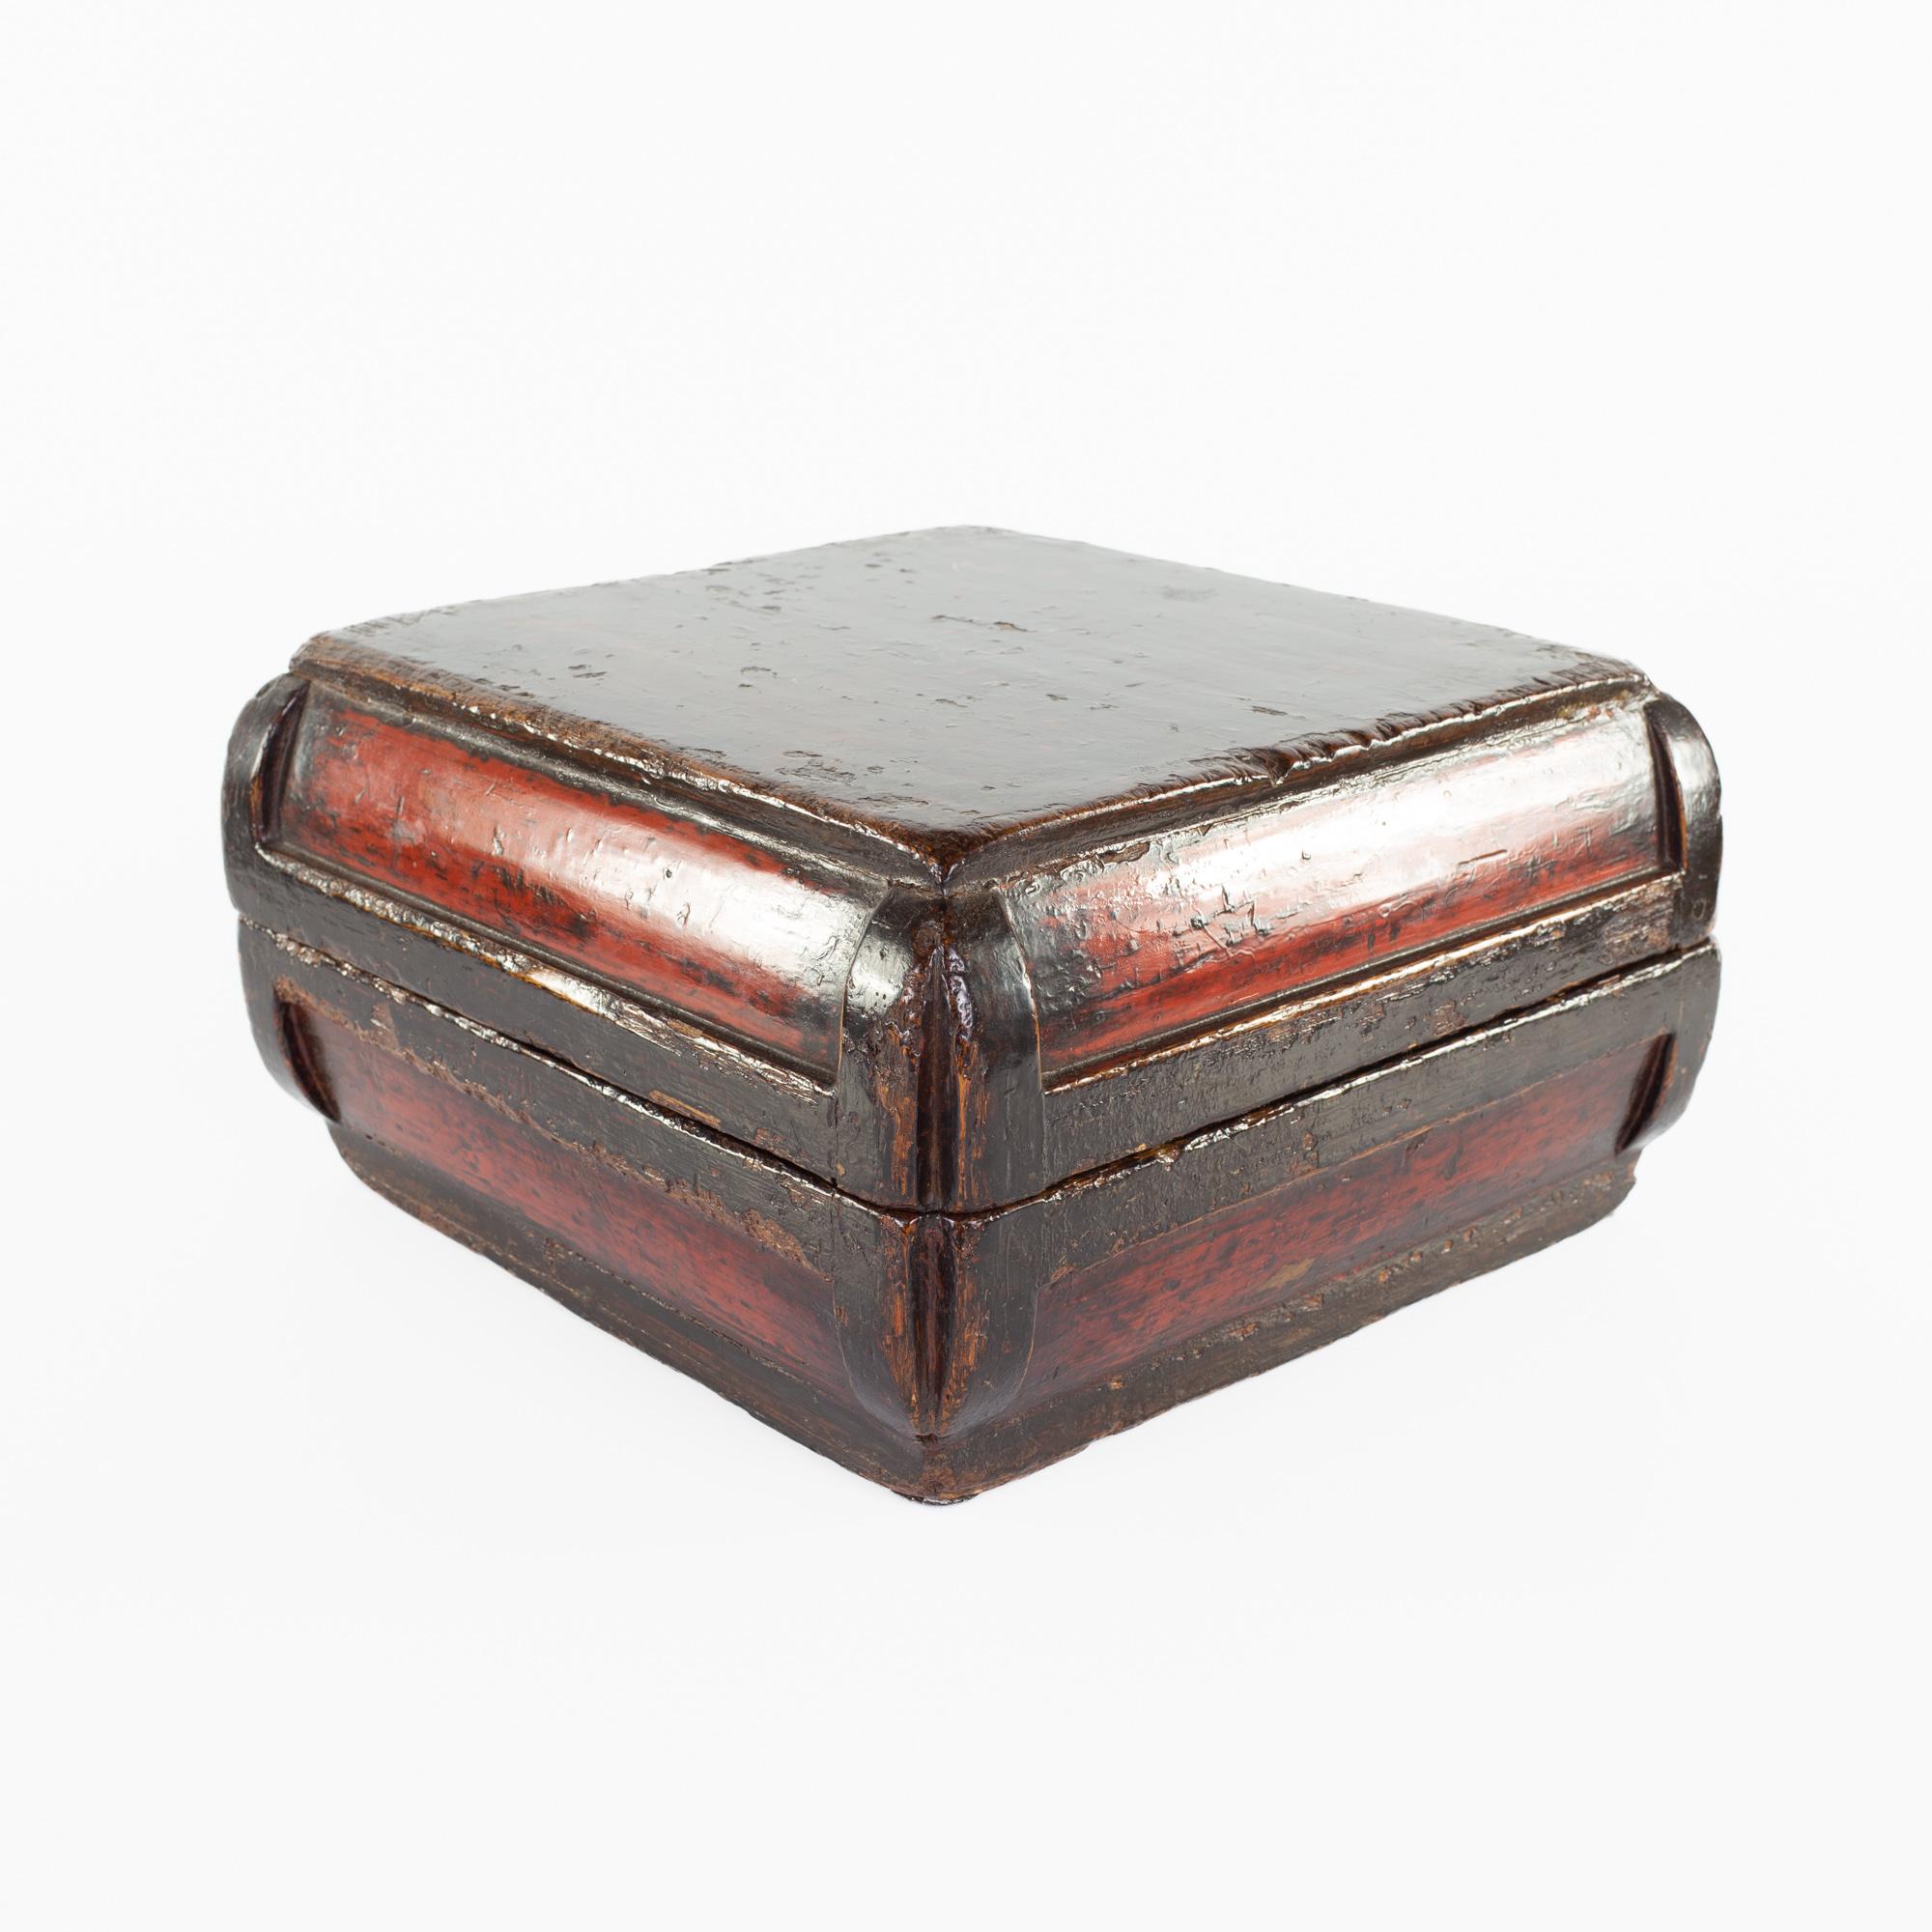 Antiqued red lacquer trinket box

This trinket box measures: 14 wide x 14 deep x 7.5 inches high

This box is in Excellent Vintage Condition with minor marks, dents, and wear.

We take our photos in a controlled lighting studio to show as much